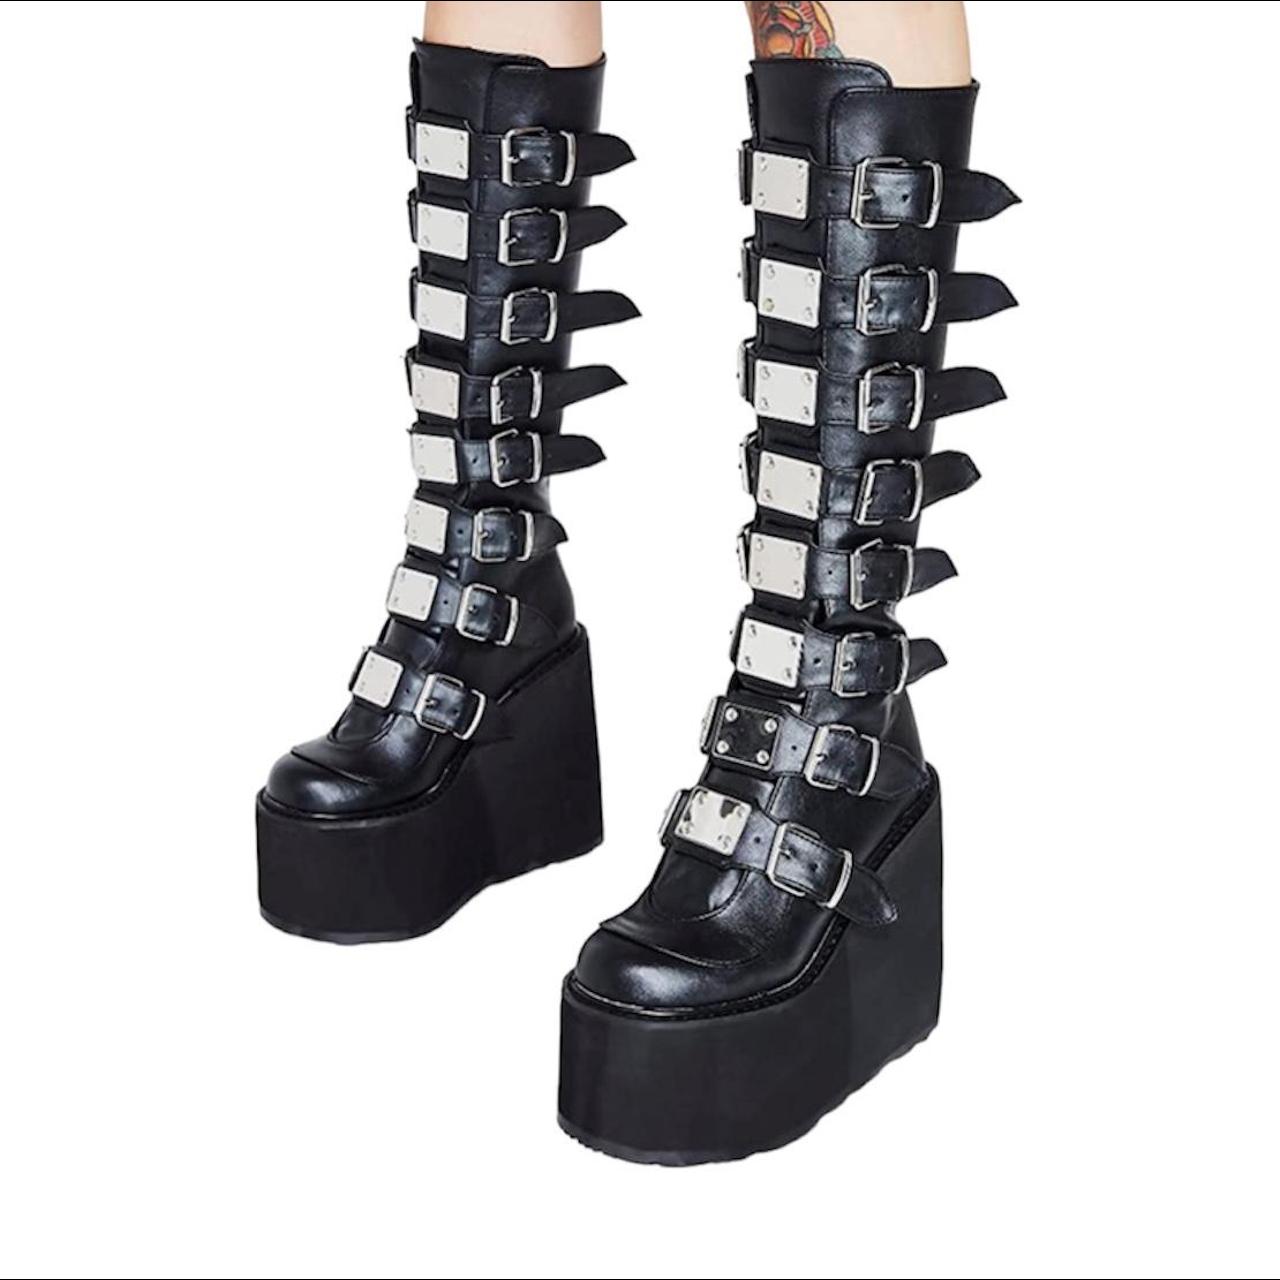 Demonia Women's Black and Silver Boots | Depop